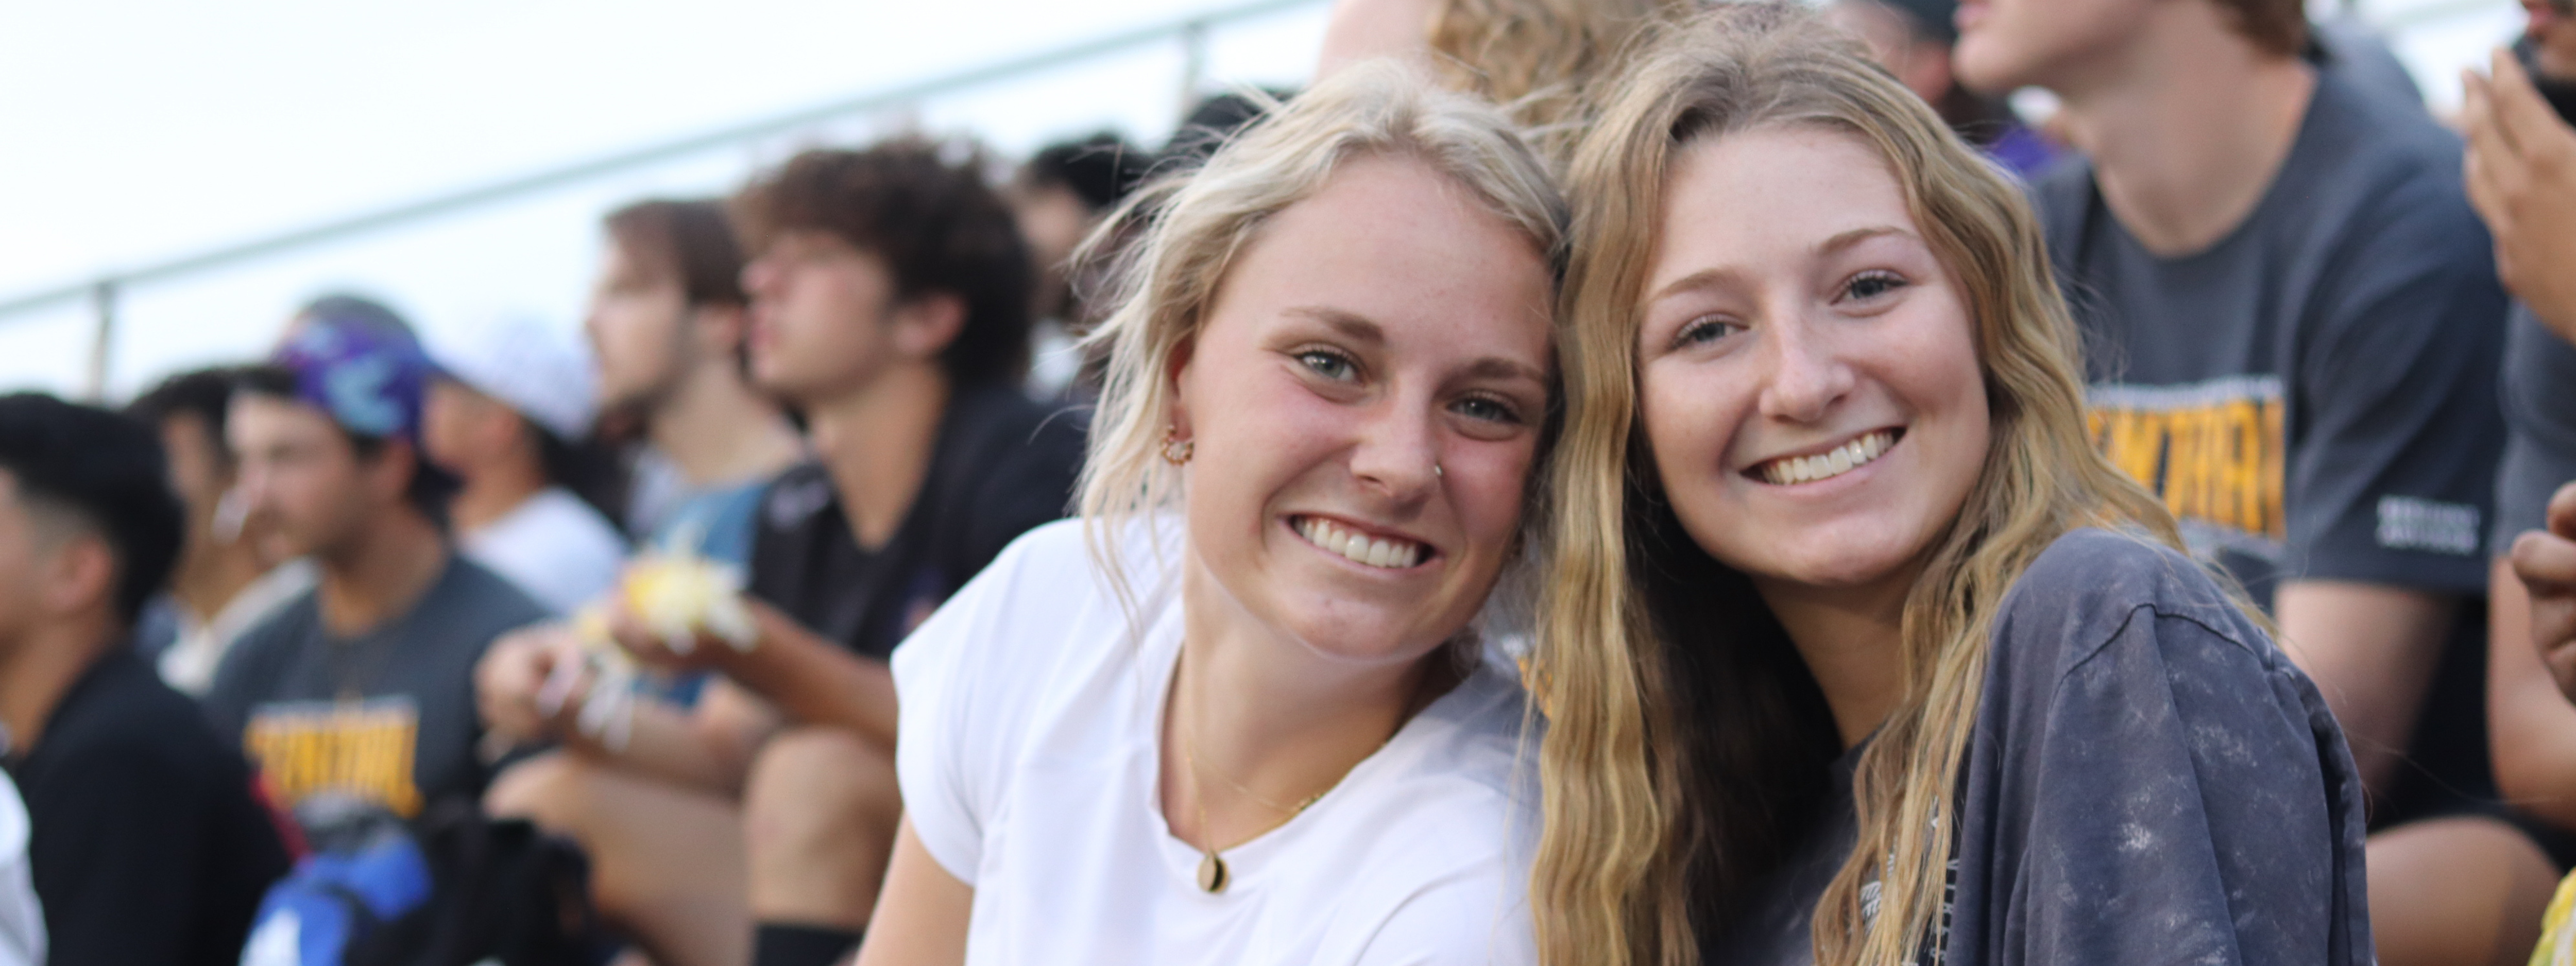 Humanities Photo Header: Central girls smiling together on the bleachers at a soccer game